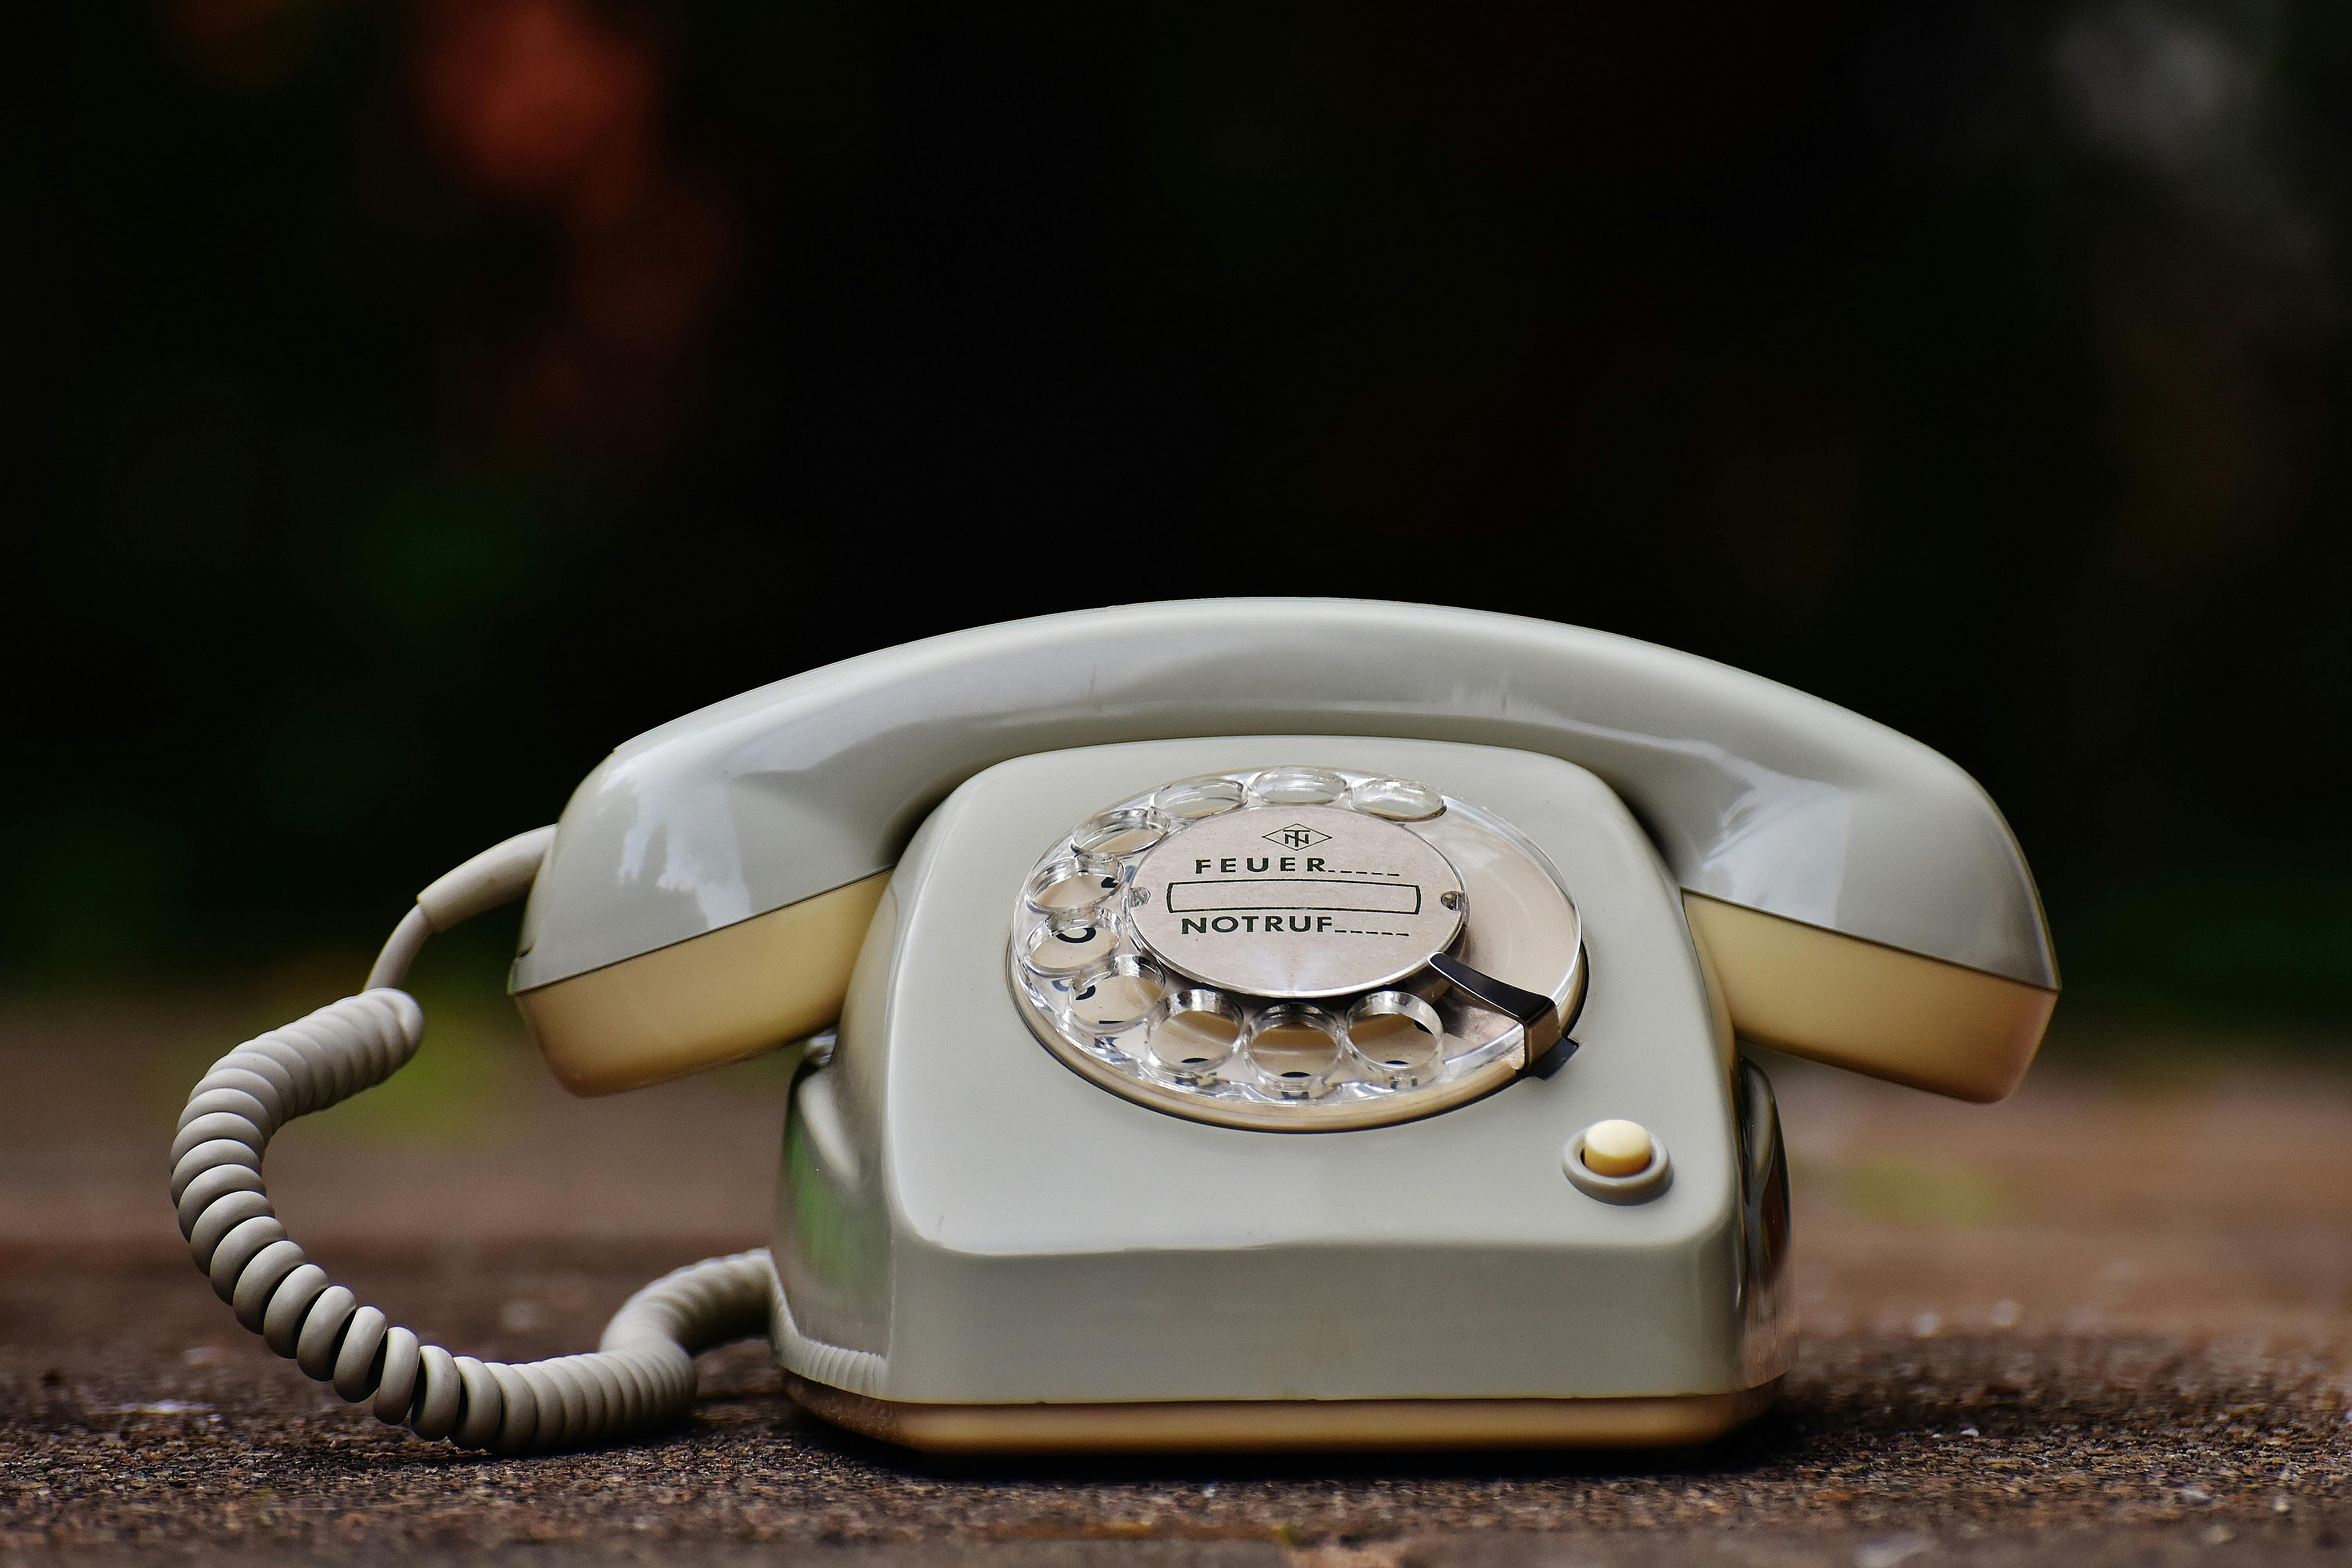 A house phone sitting on a table | Source: Pexels